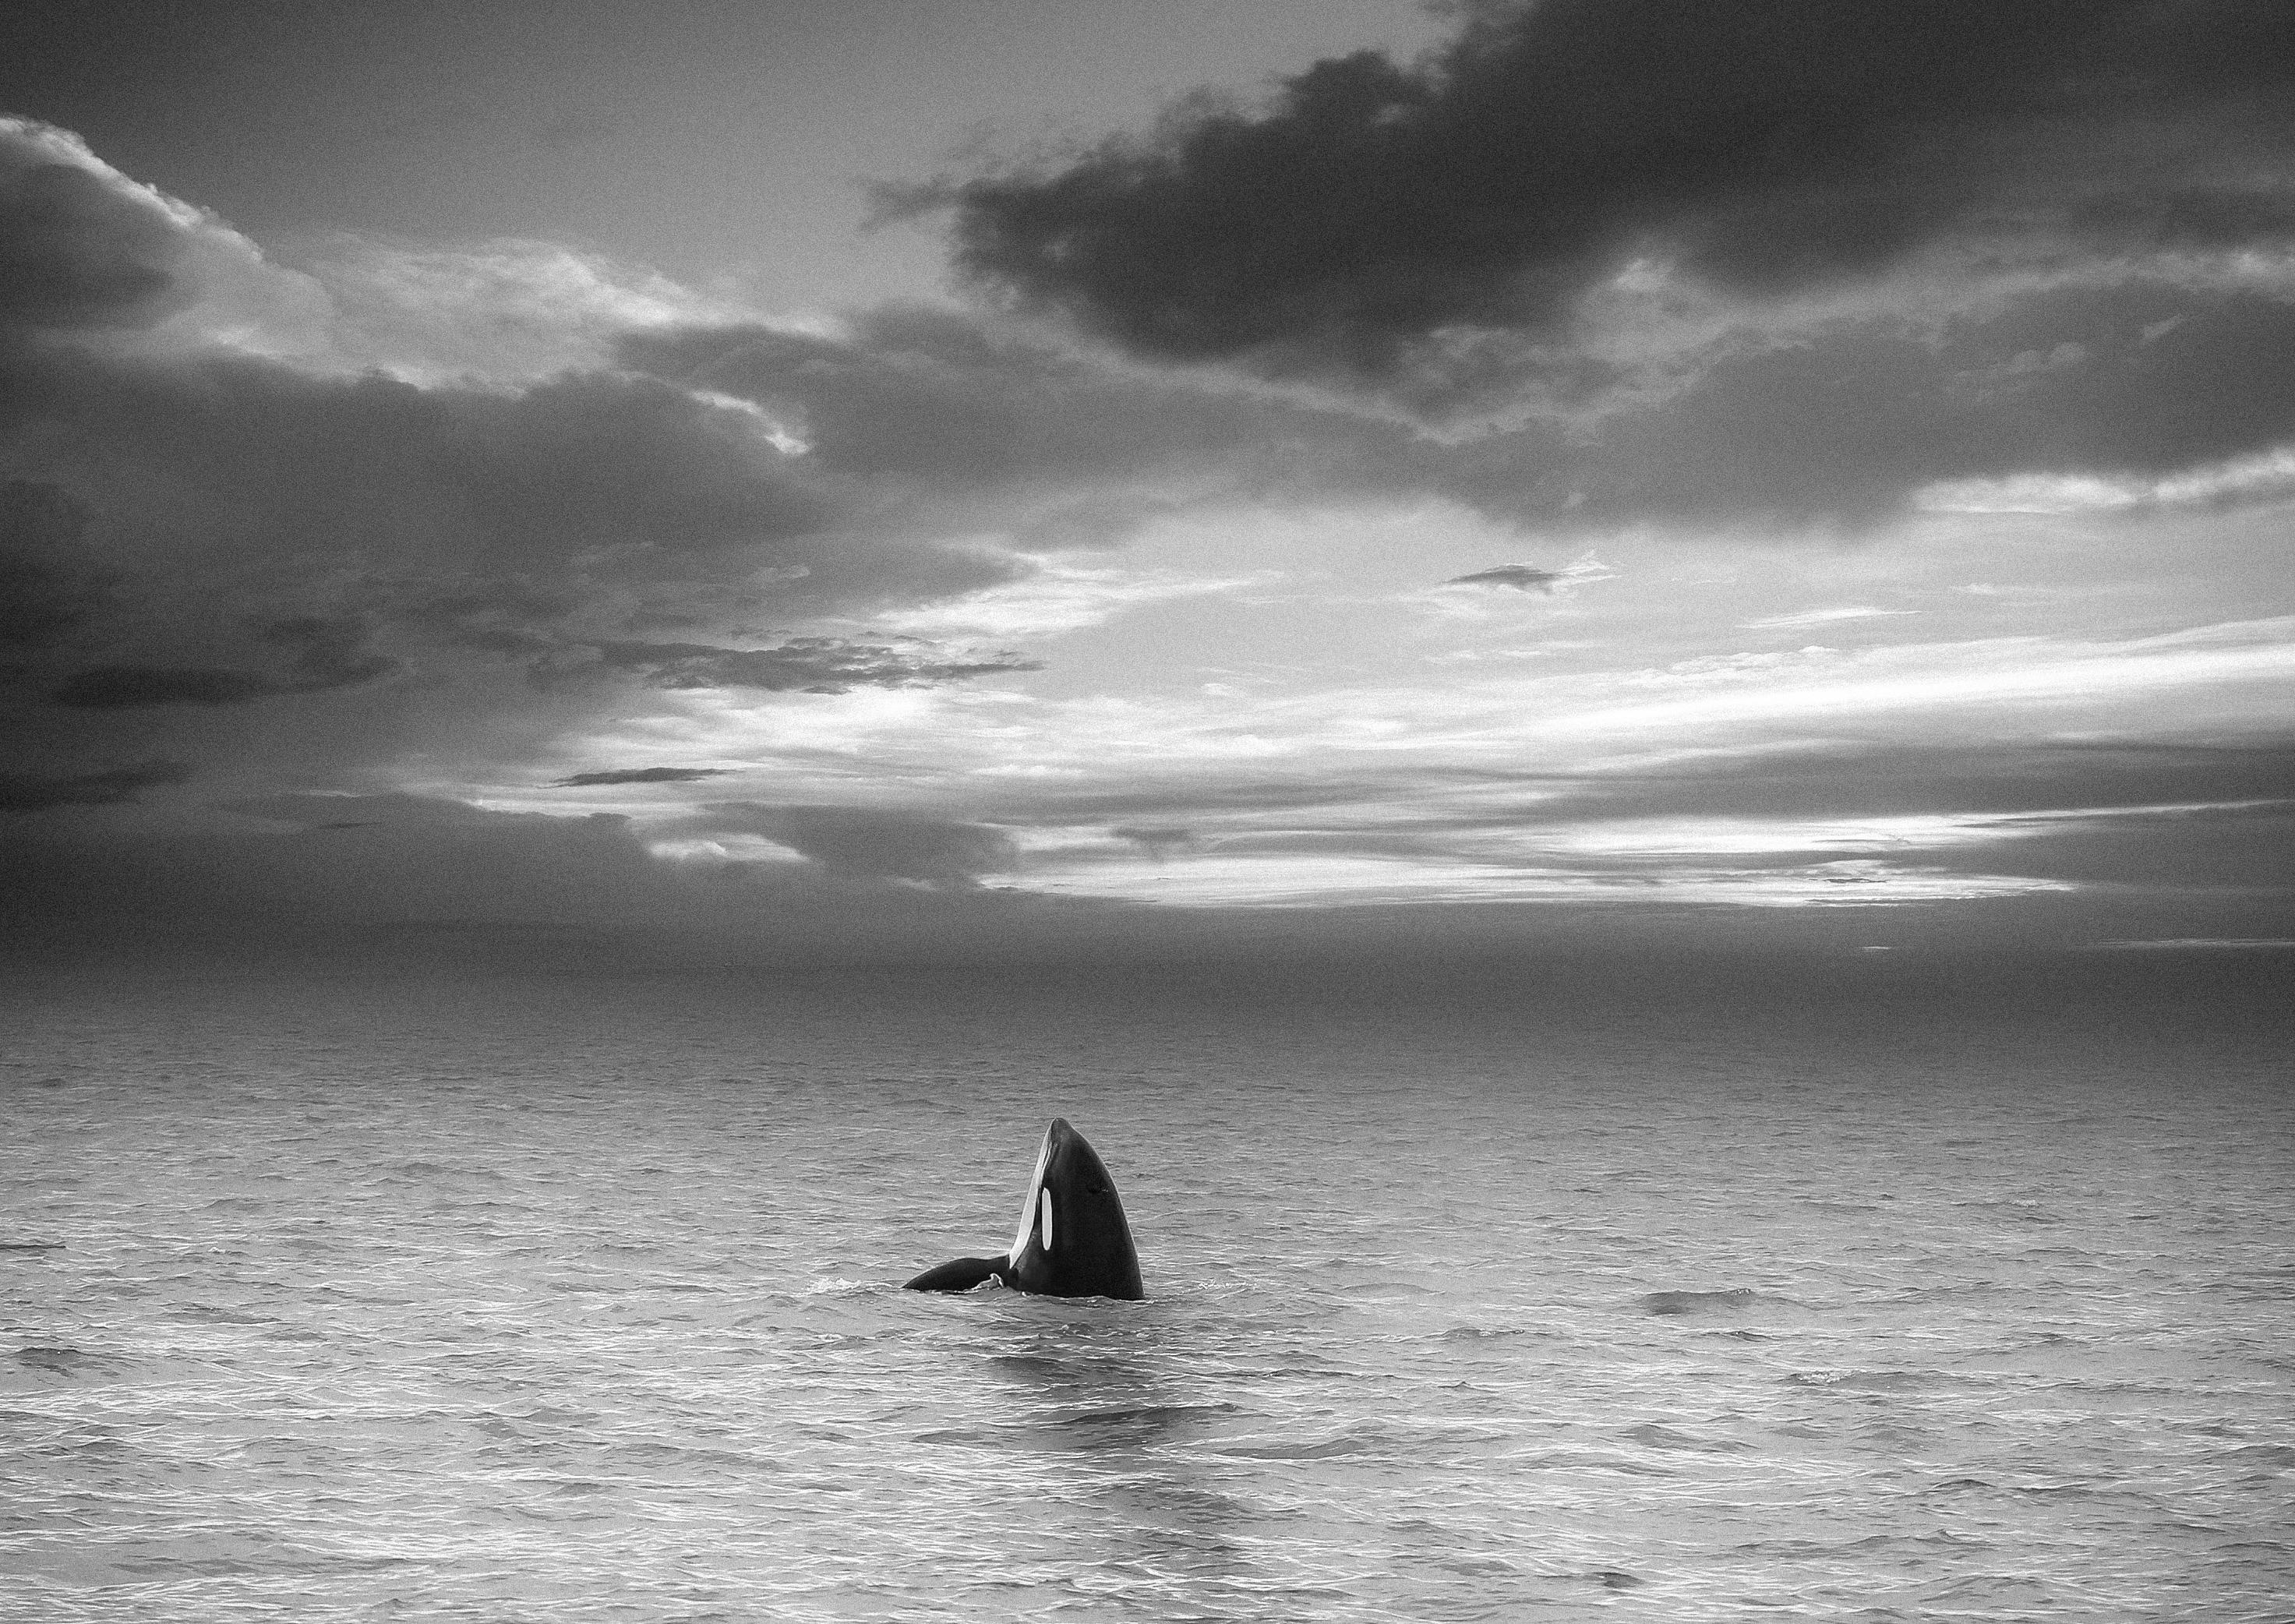 Shane Russeck Animal Print - "To the Heavens" 45x60 Last Photograph of Orca "Granny" Killer Whale Photography